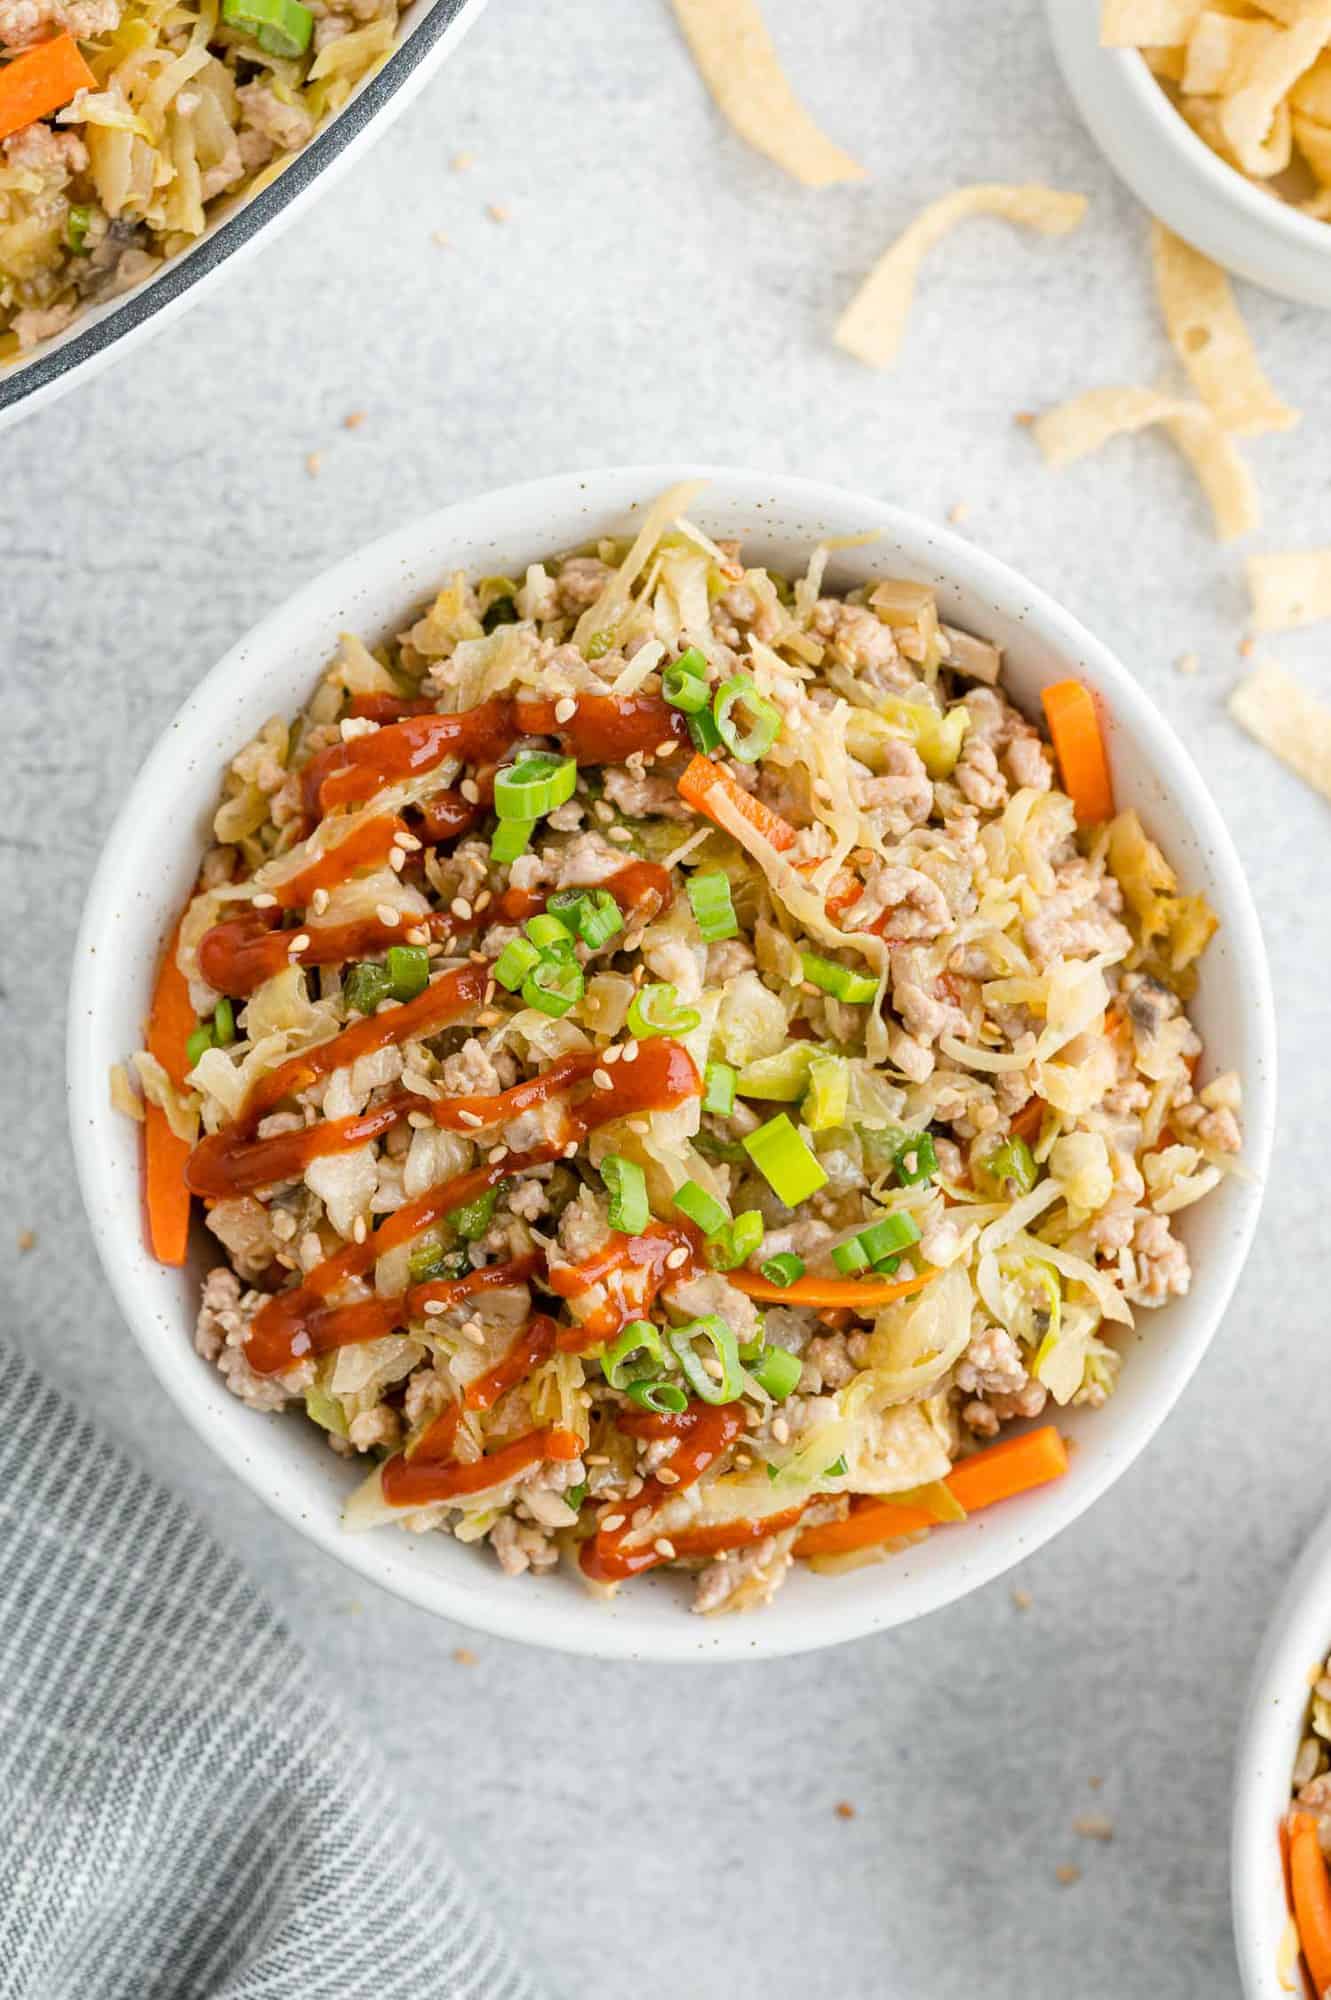 Egg roll in a bowl with toppings.